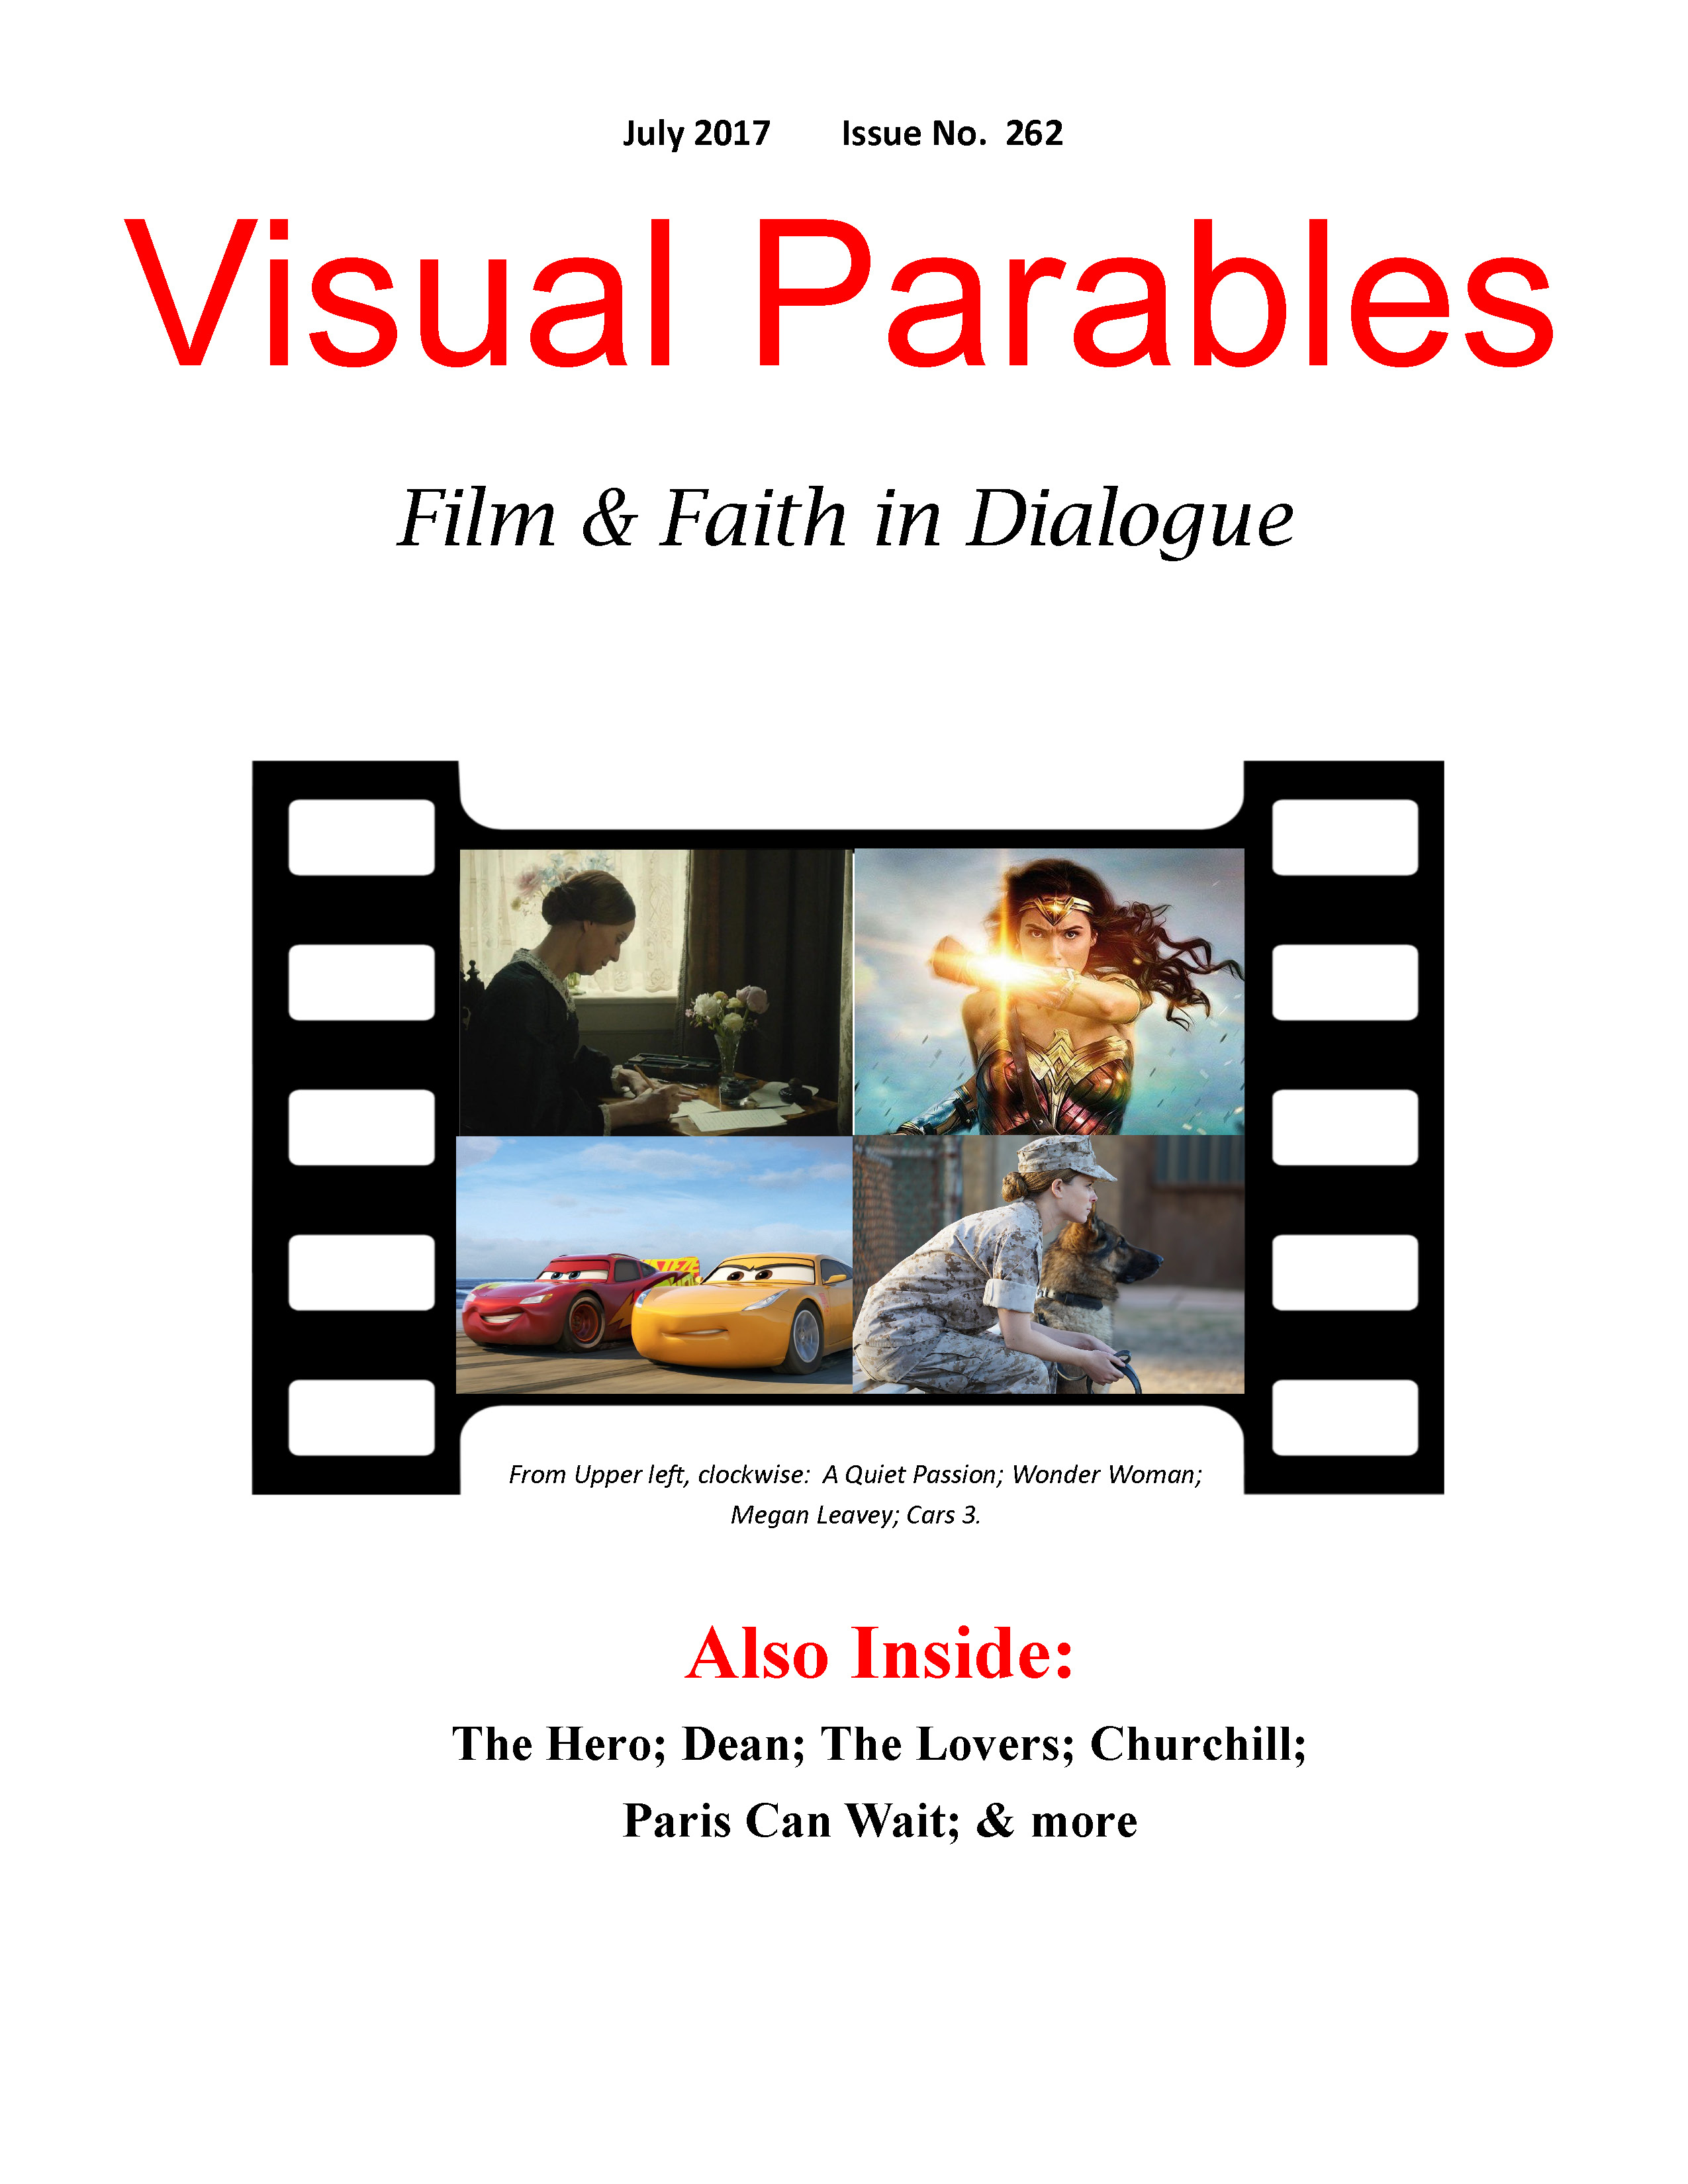 July 2017 issue of Visual Parables